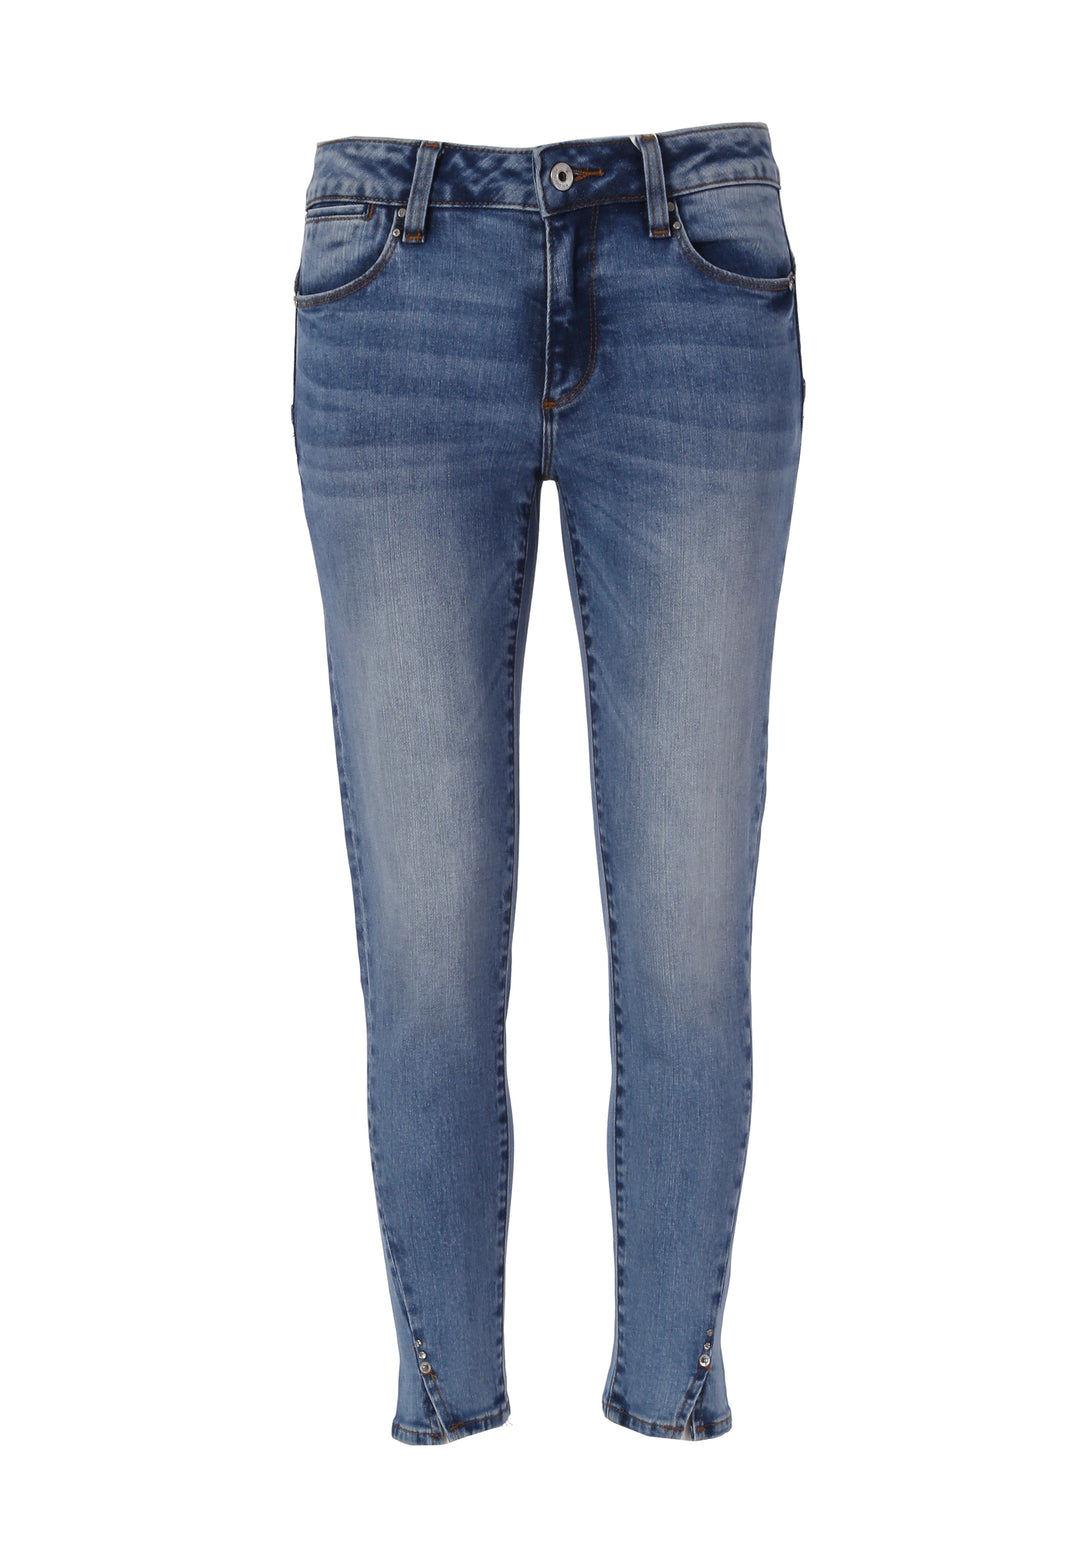 Jeans skinny fit with push-up effect made in denim with bleached wash